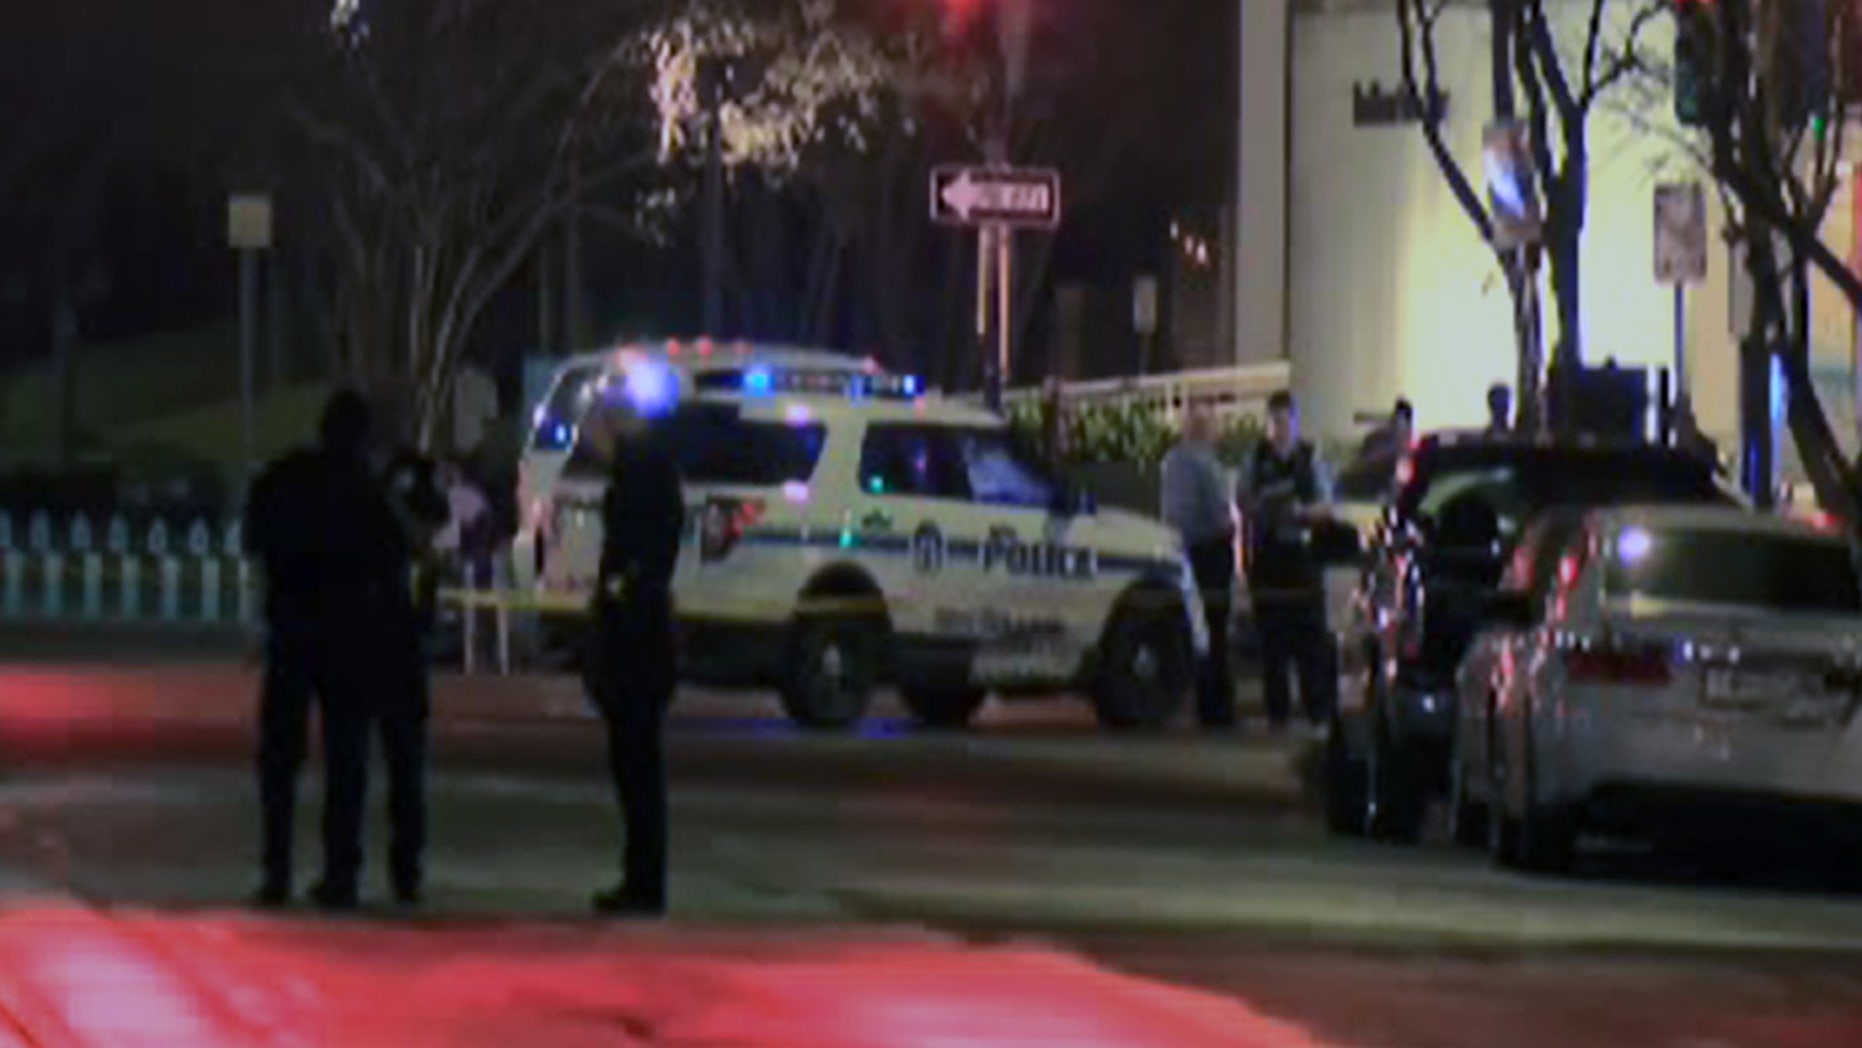 Police respond to shootings Sunday night in New Orleans Central Business District